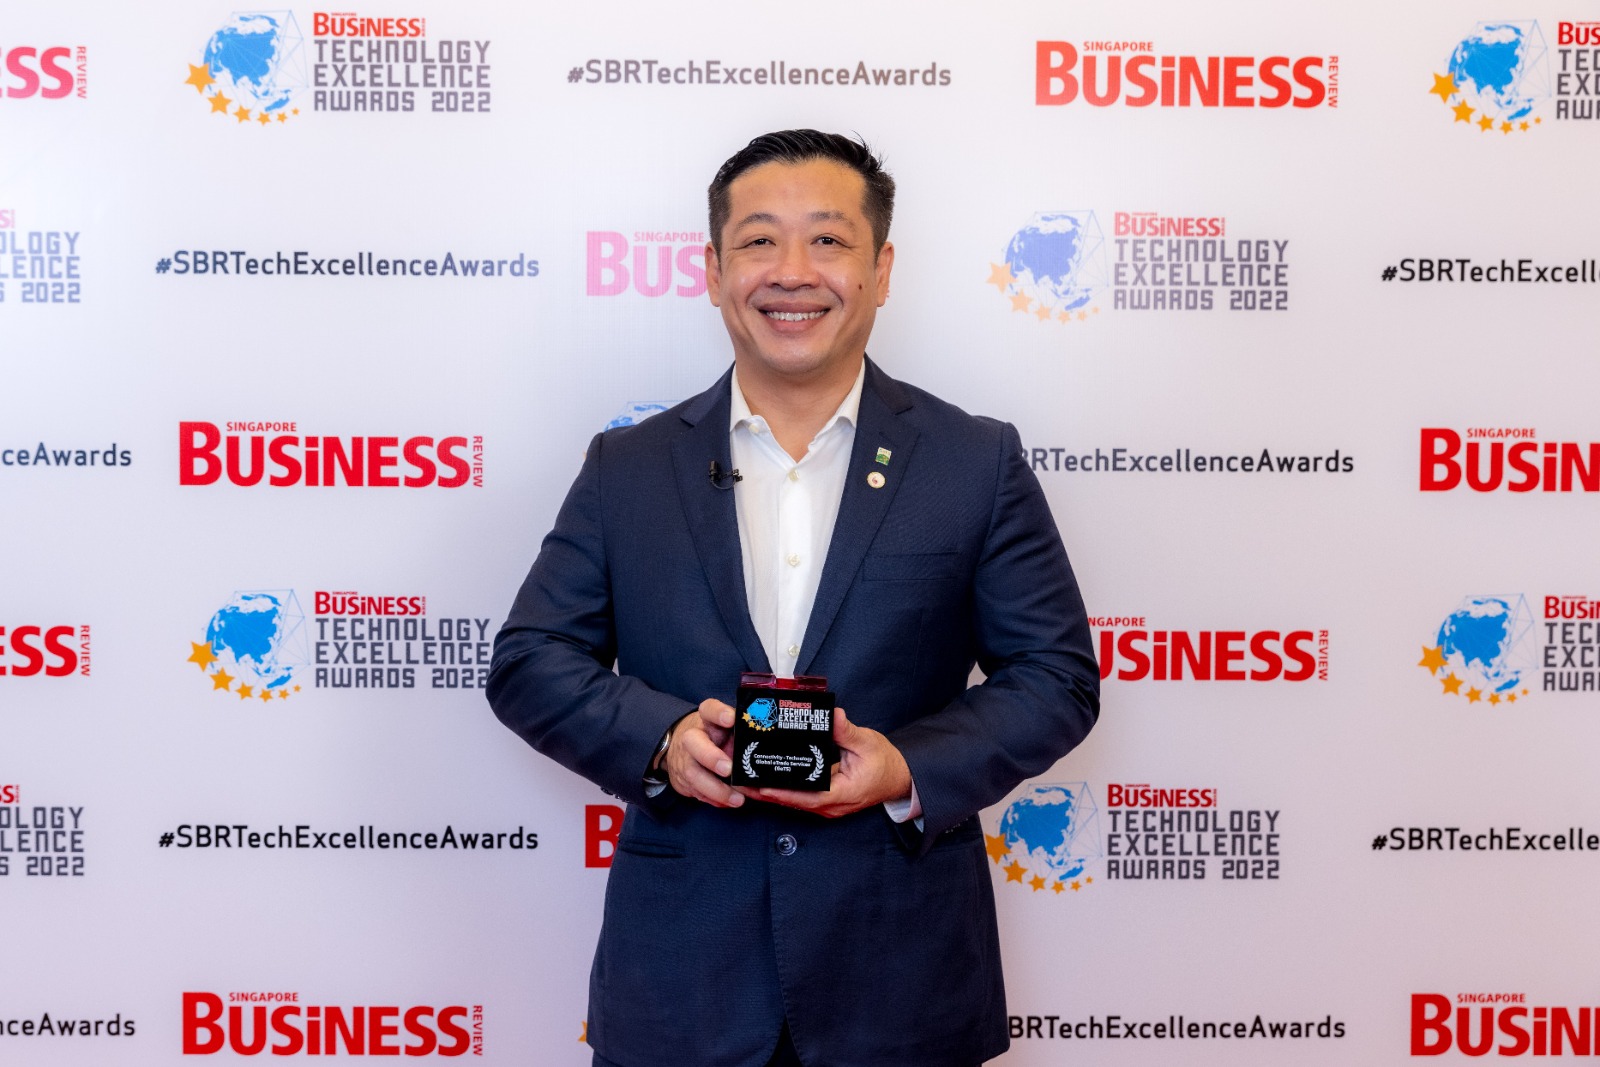 Global eTrade Services bags Technology Excellence Award for Connectivity - Technology